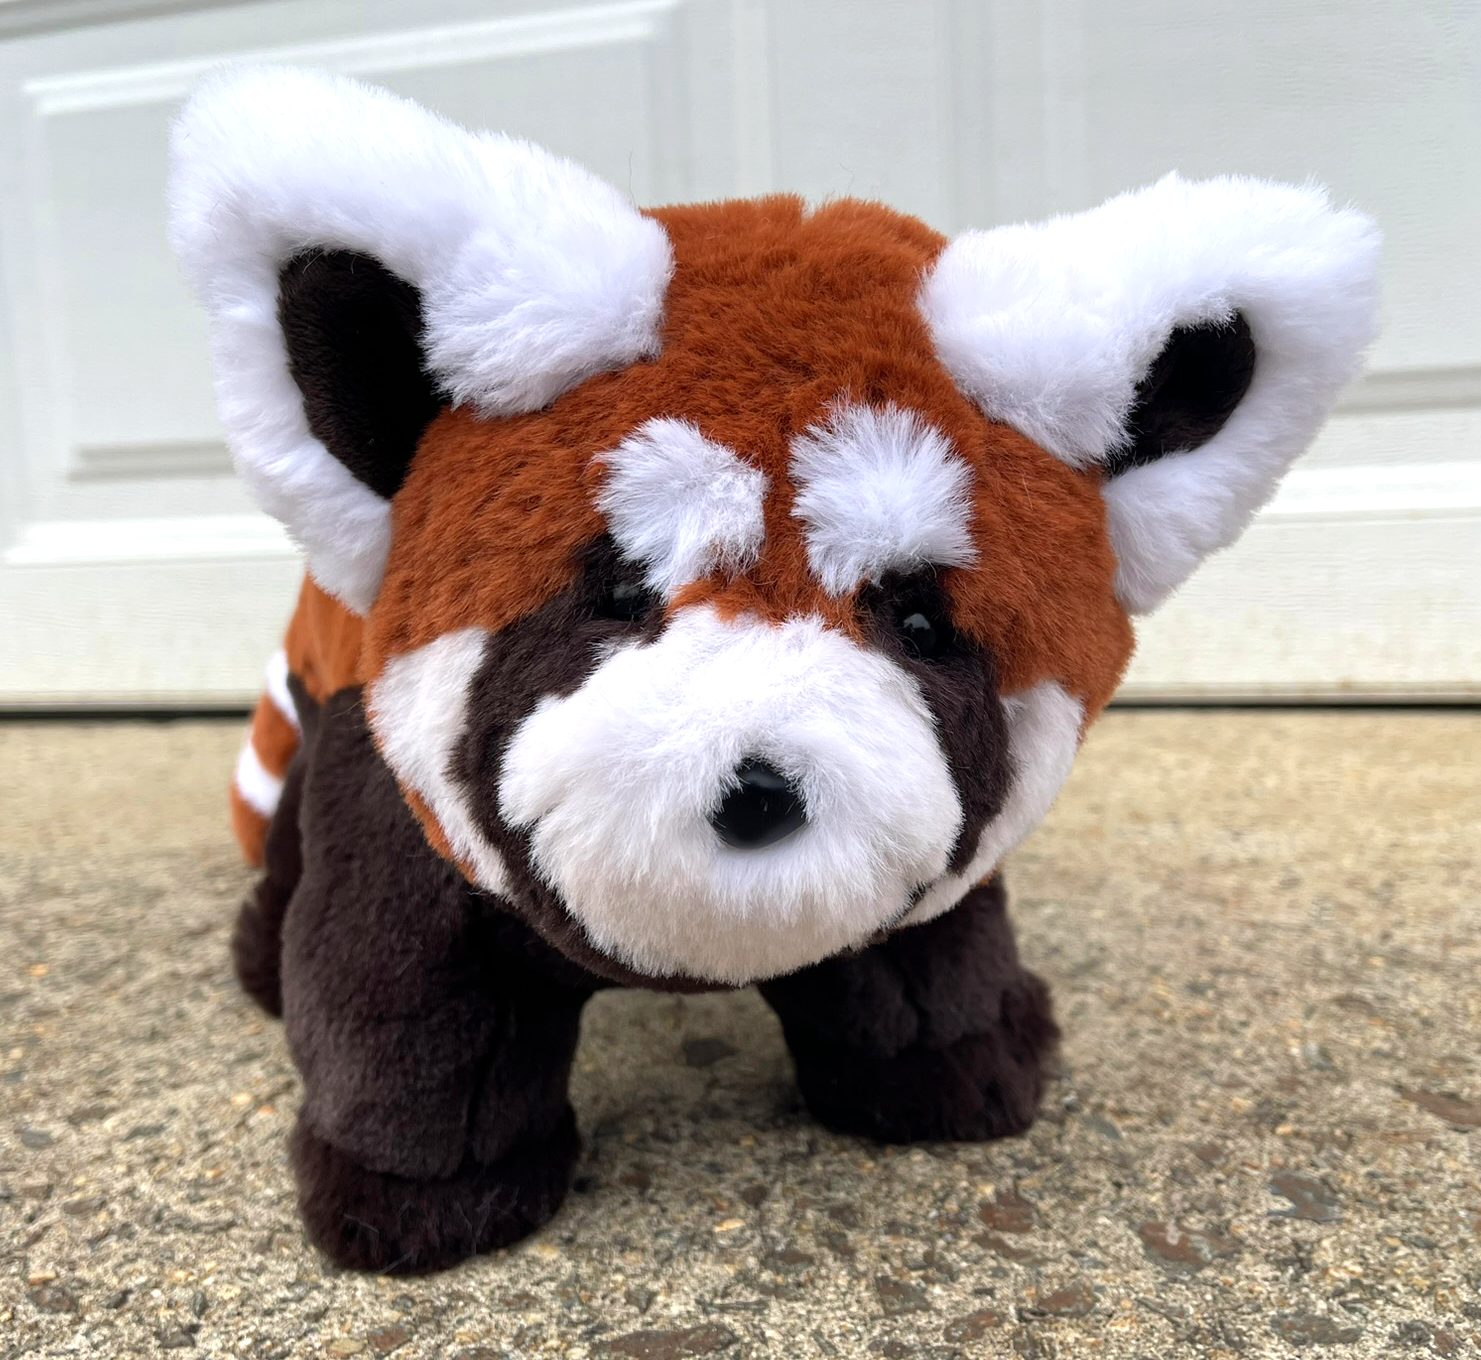 A photo of a red panda plush looking at the camera. It has a very round head.